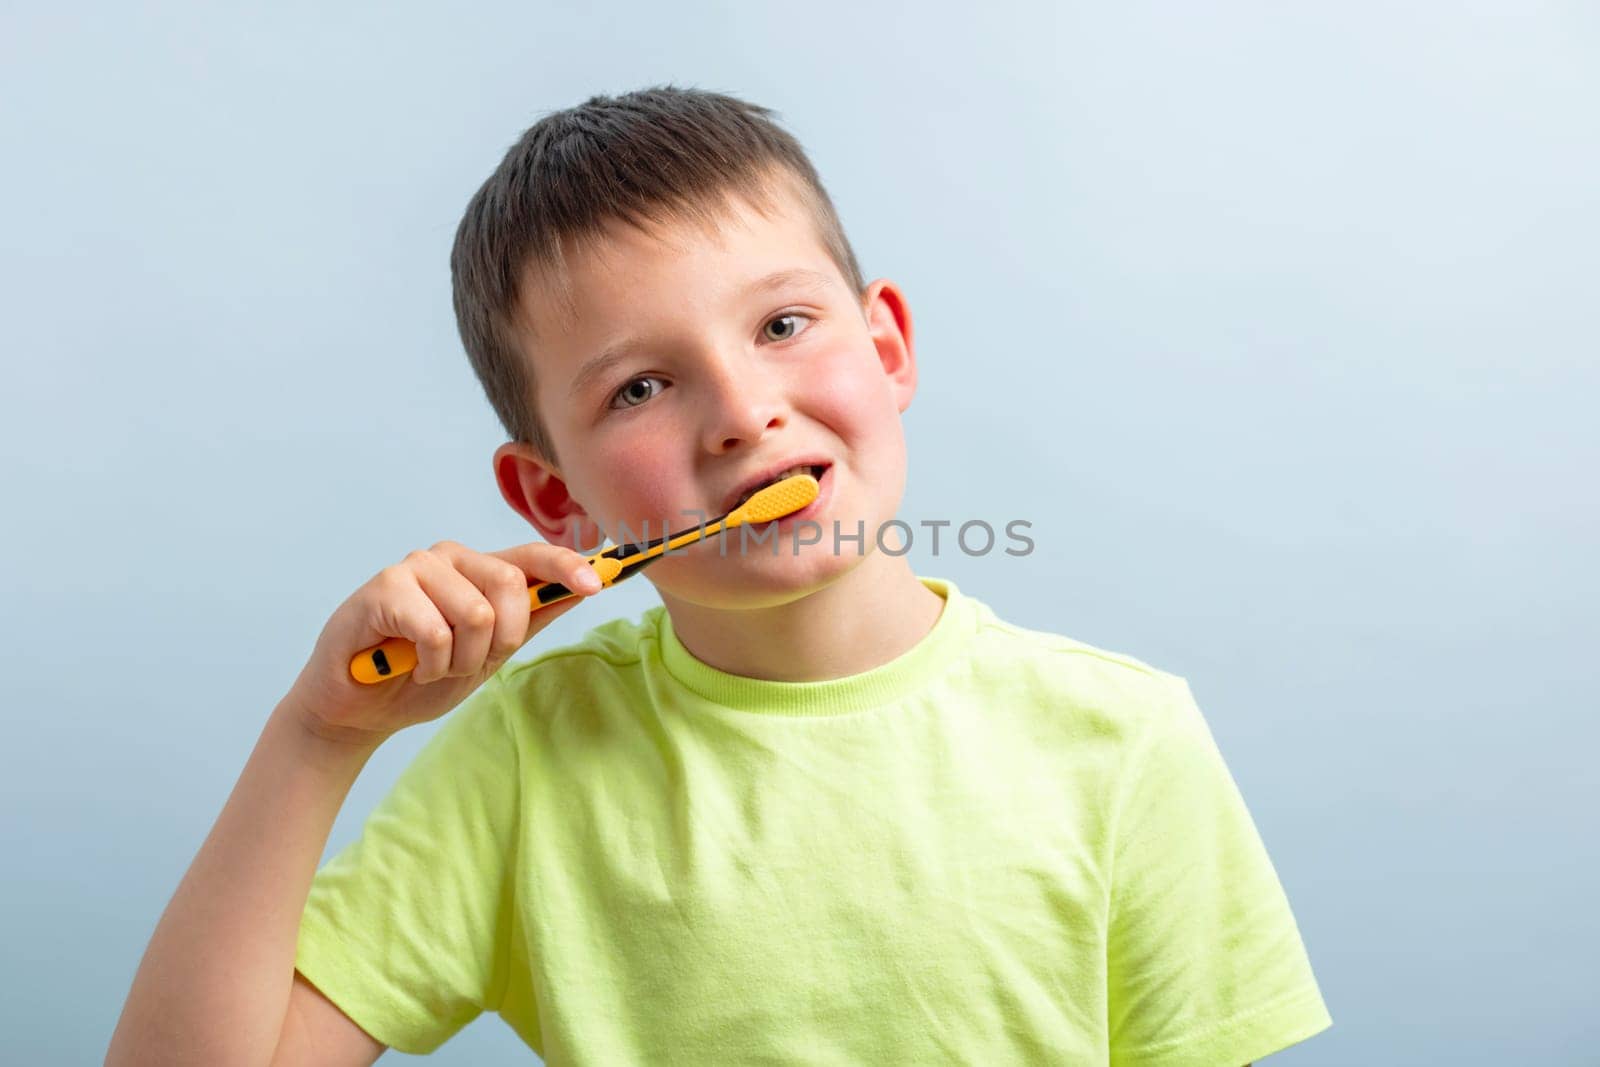 A child in t-shirt brushing teeth with toothbrush on blue background by andreyz